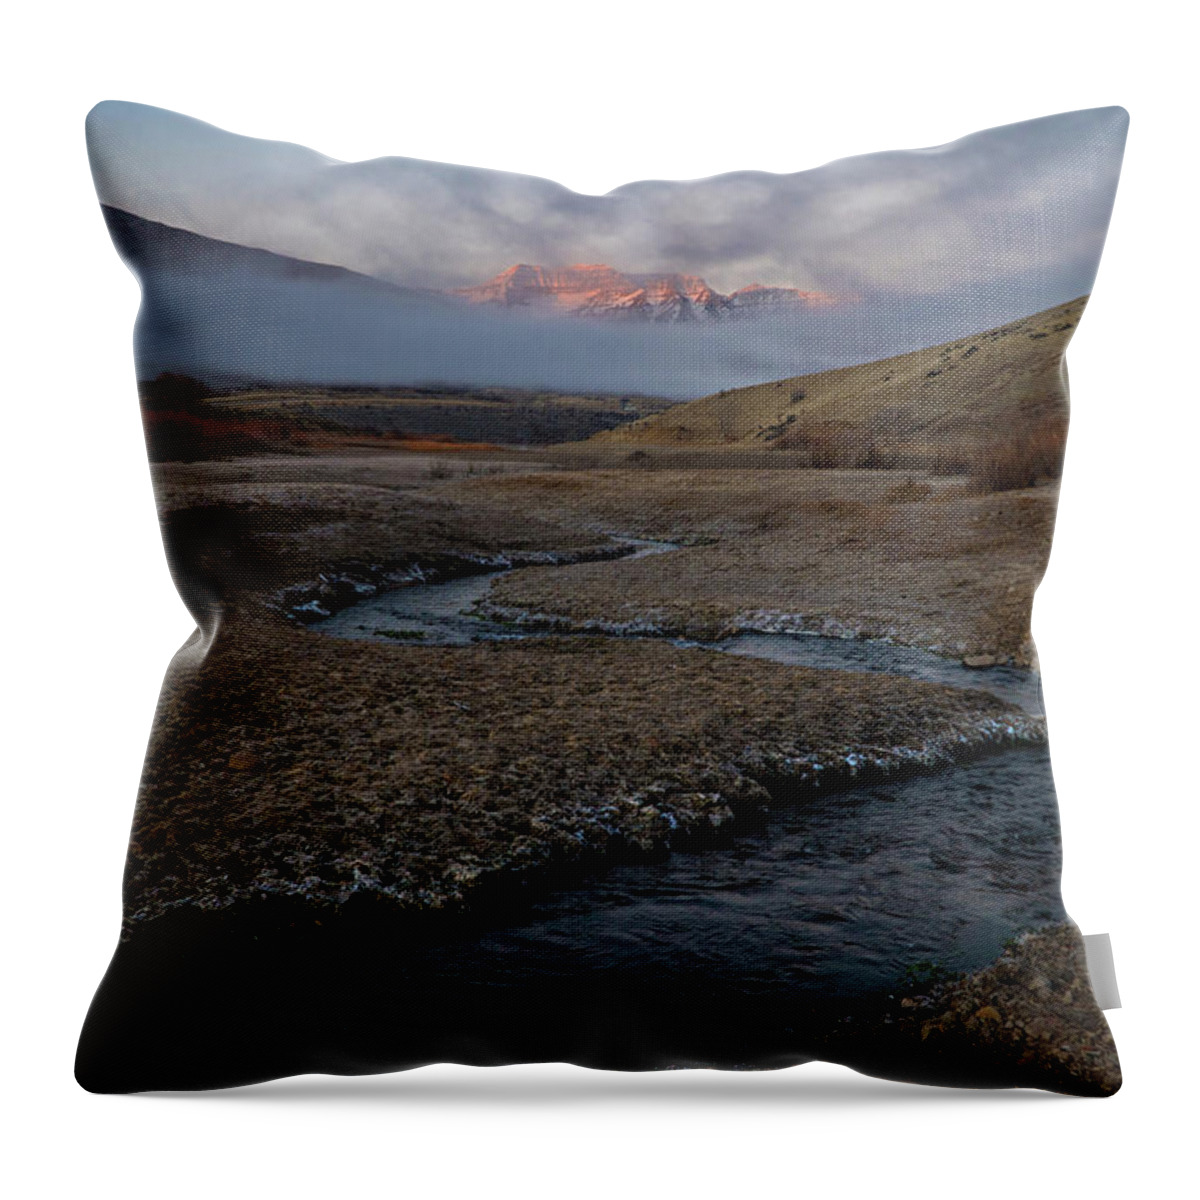 Utah Throw Pillow featuring the photograph Winding Stream by Wesley Aston